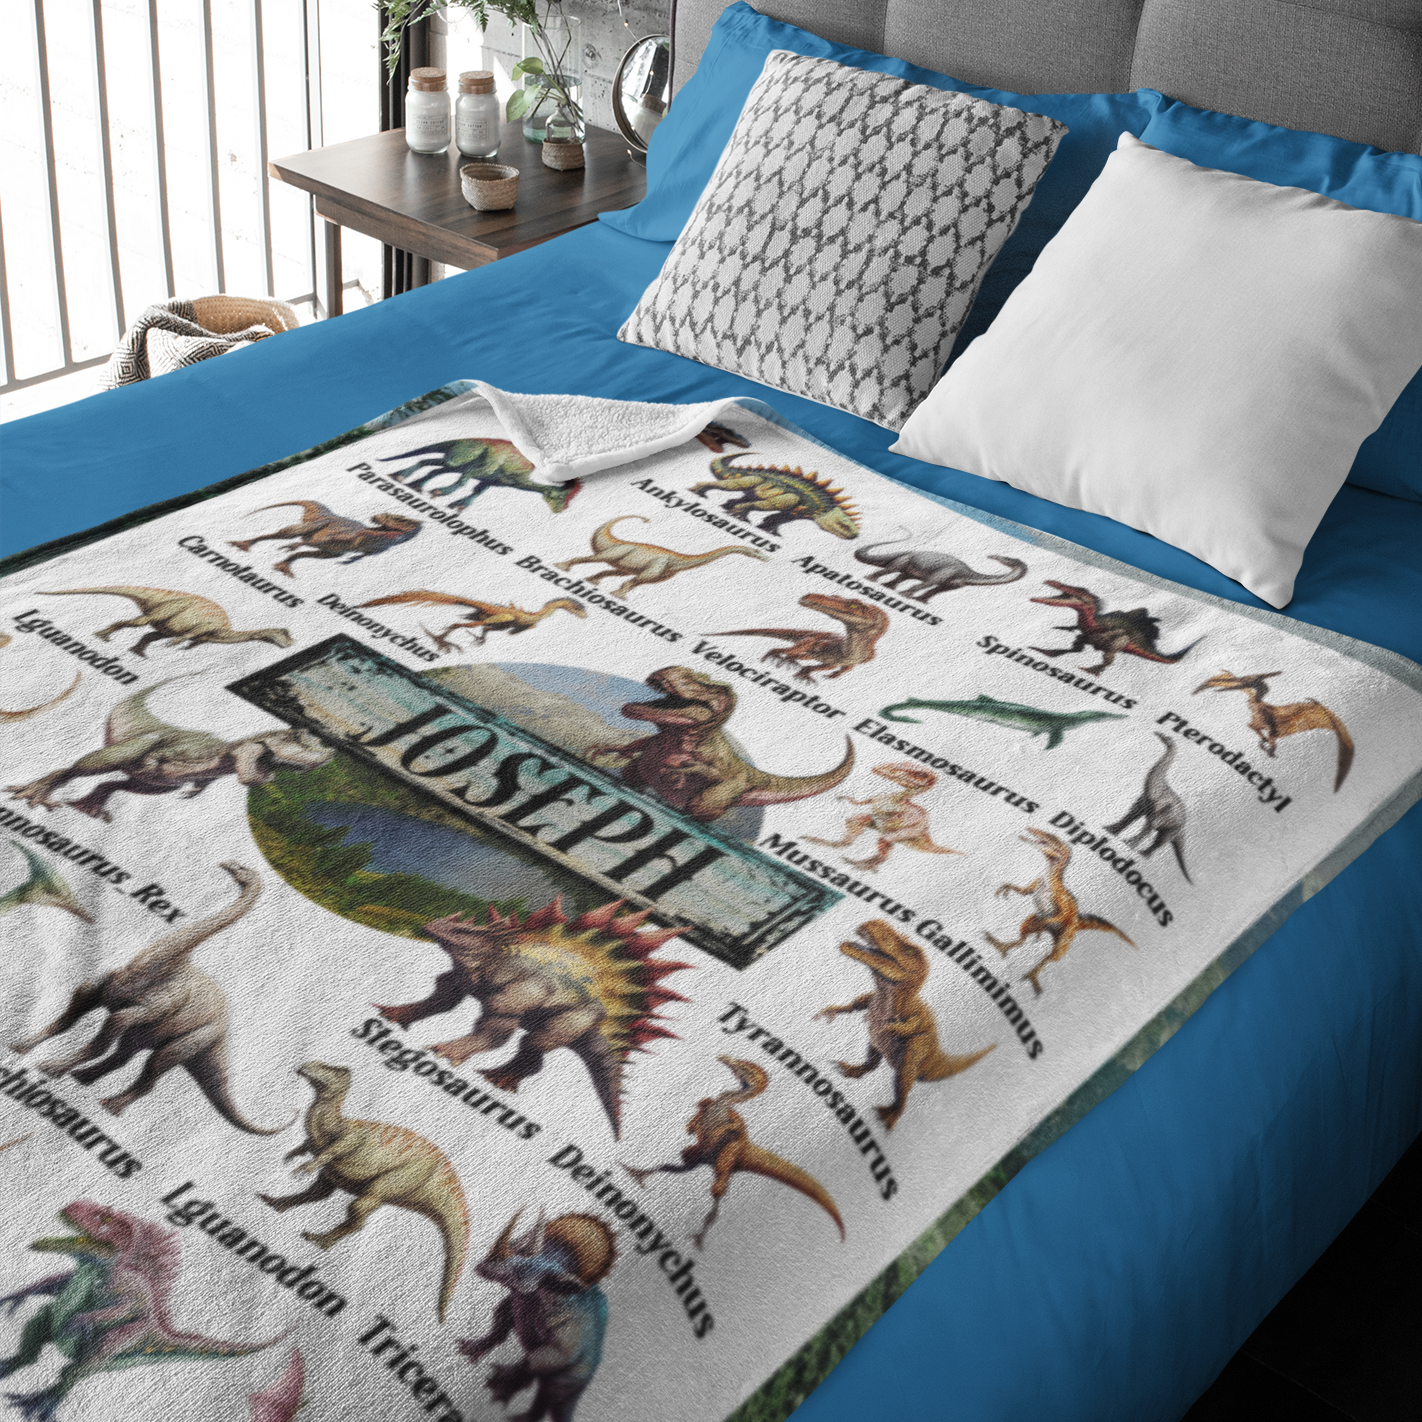 Personalized Custom Dinosaurs Collection Name Blankets - Gift for Kids